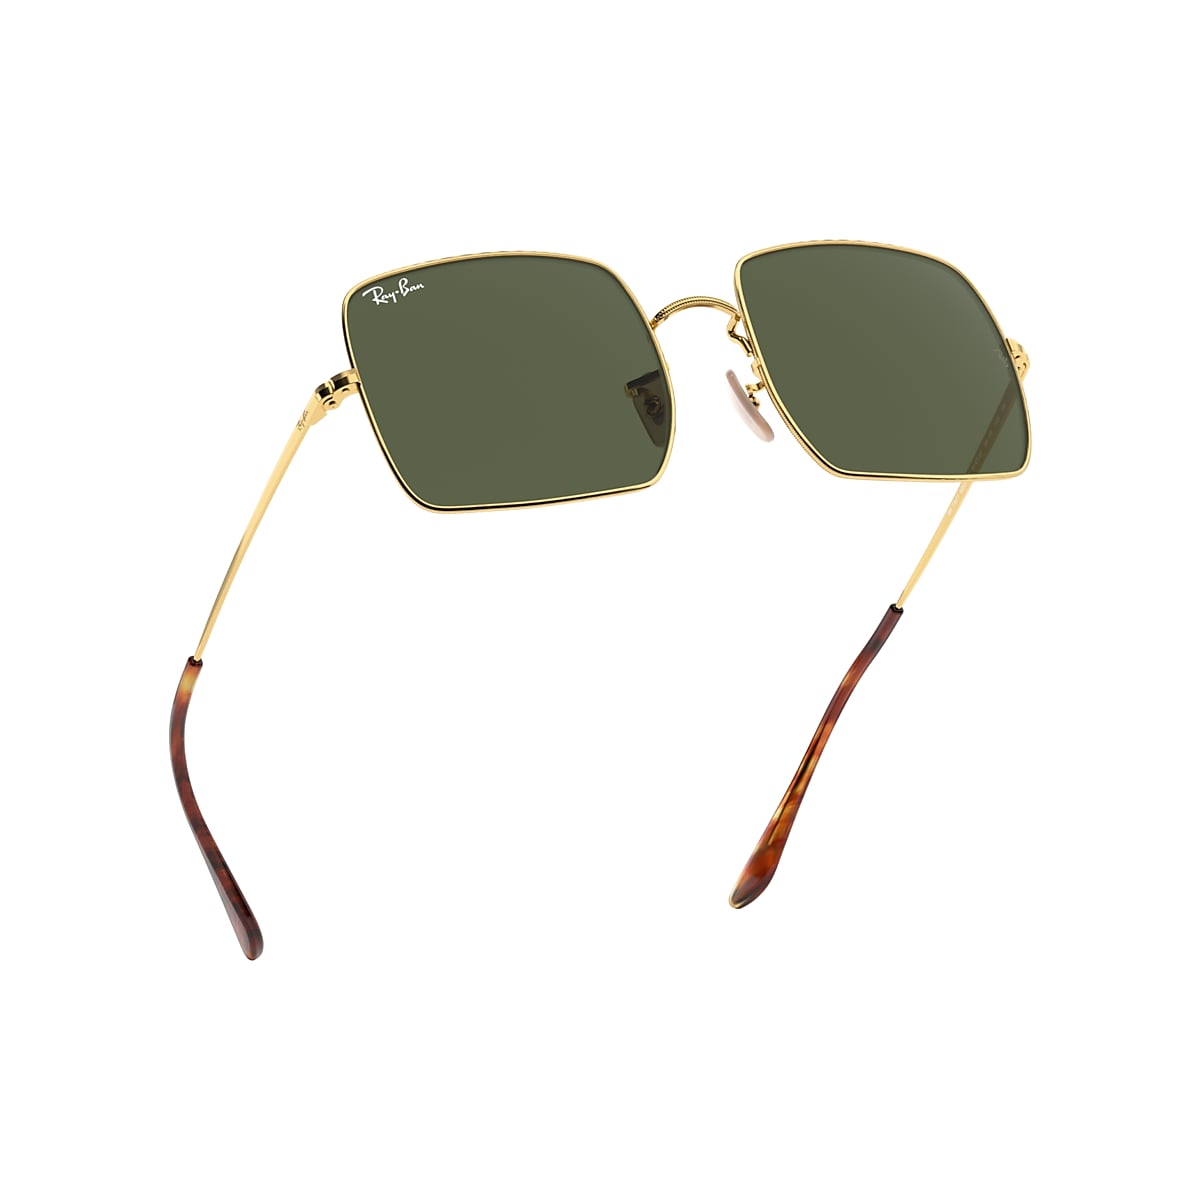 Square 1971 Classic Sunglasses in Gold and Green | Ray-Ban®